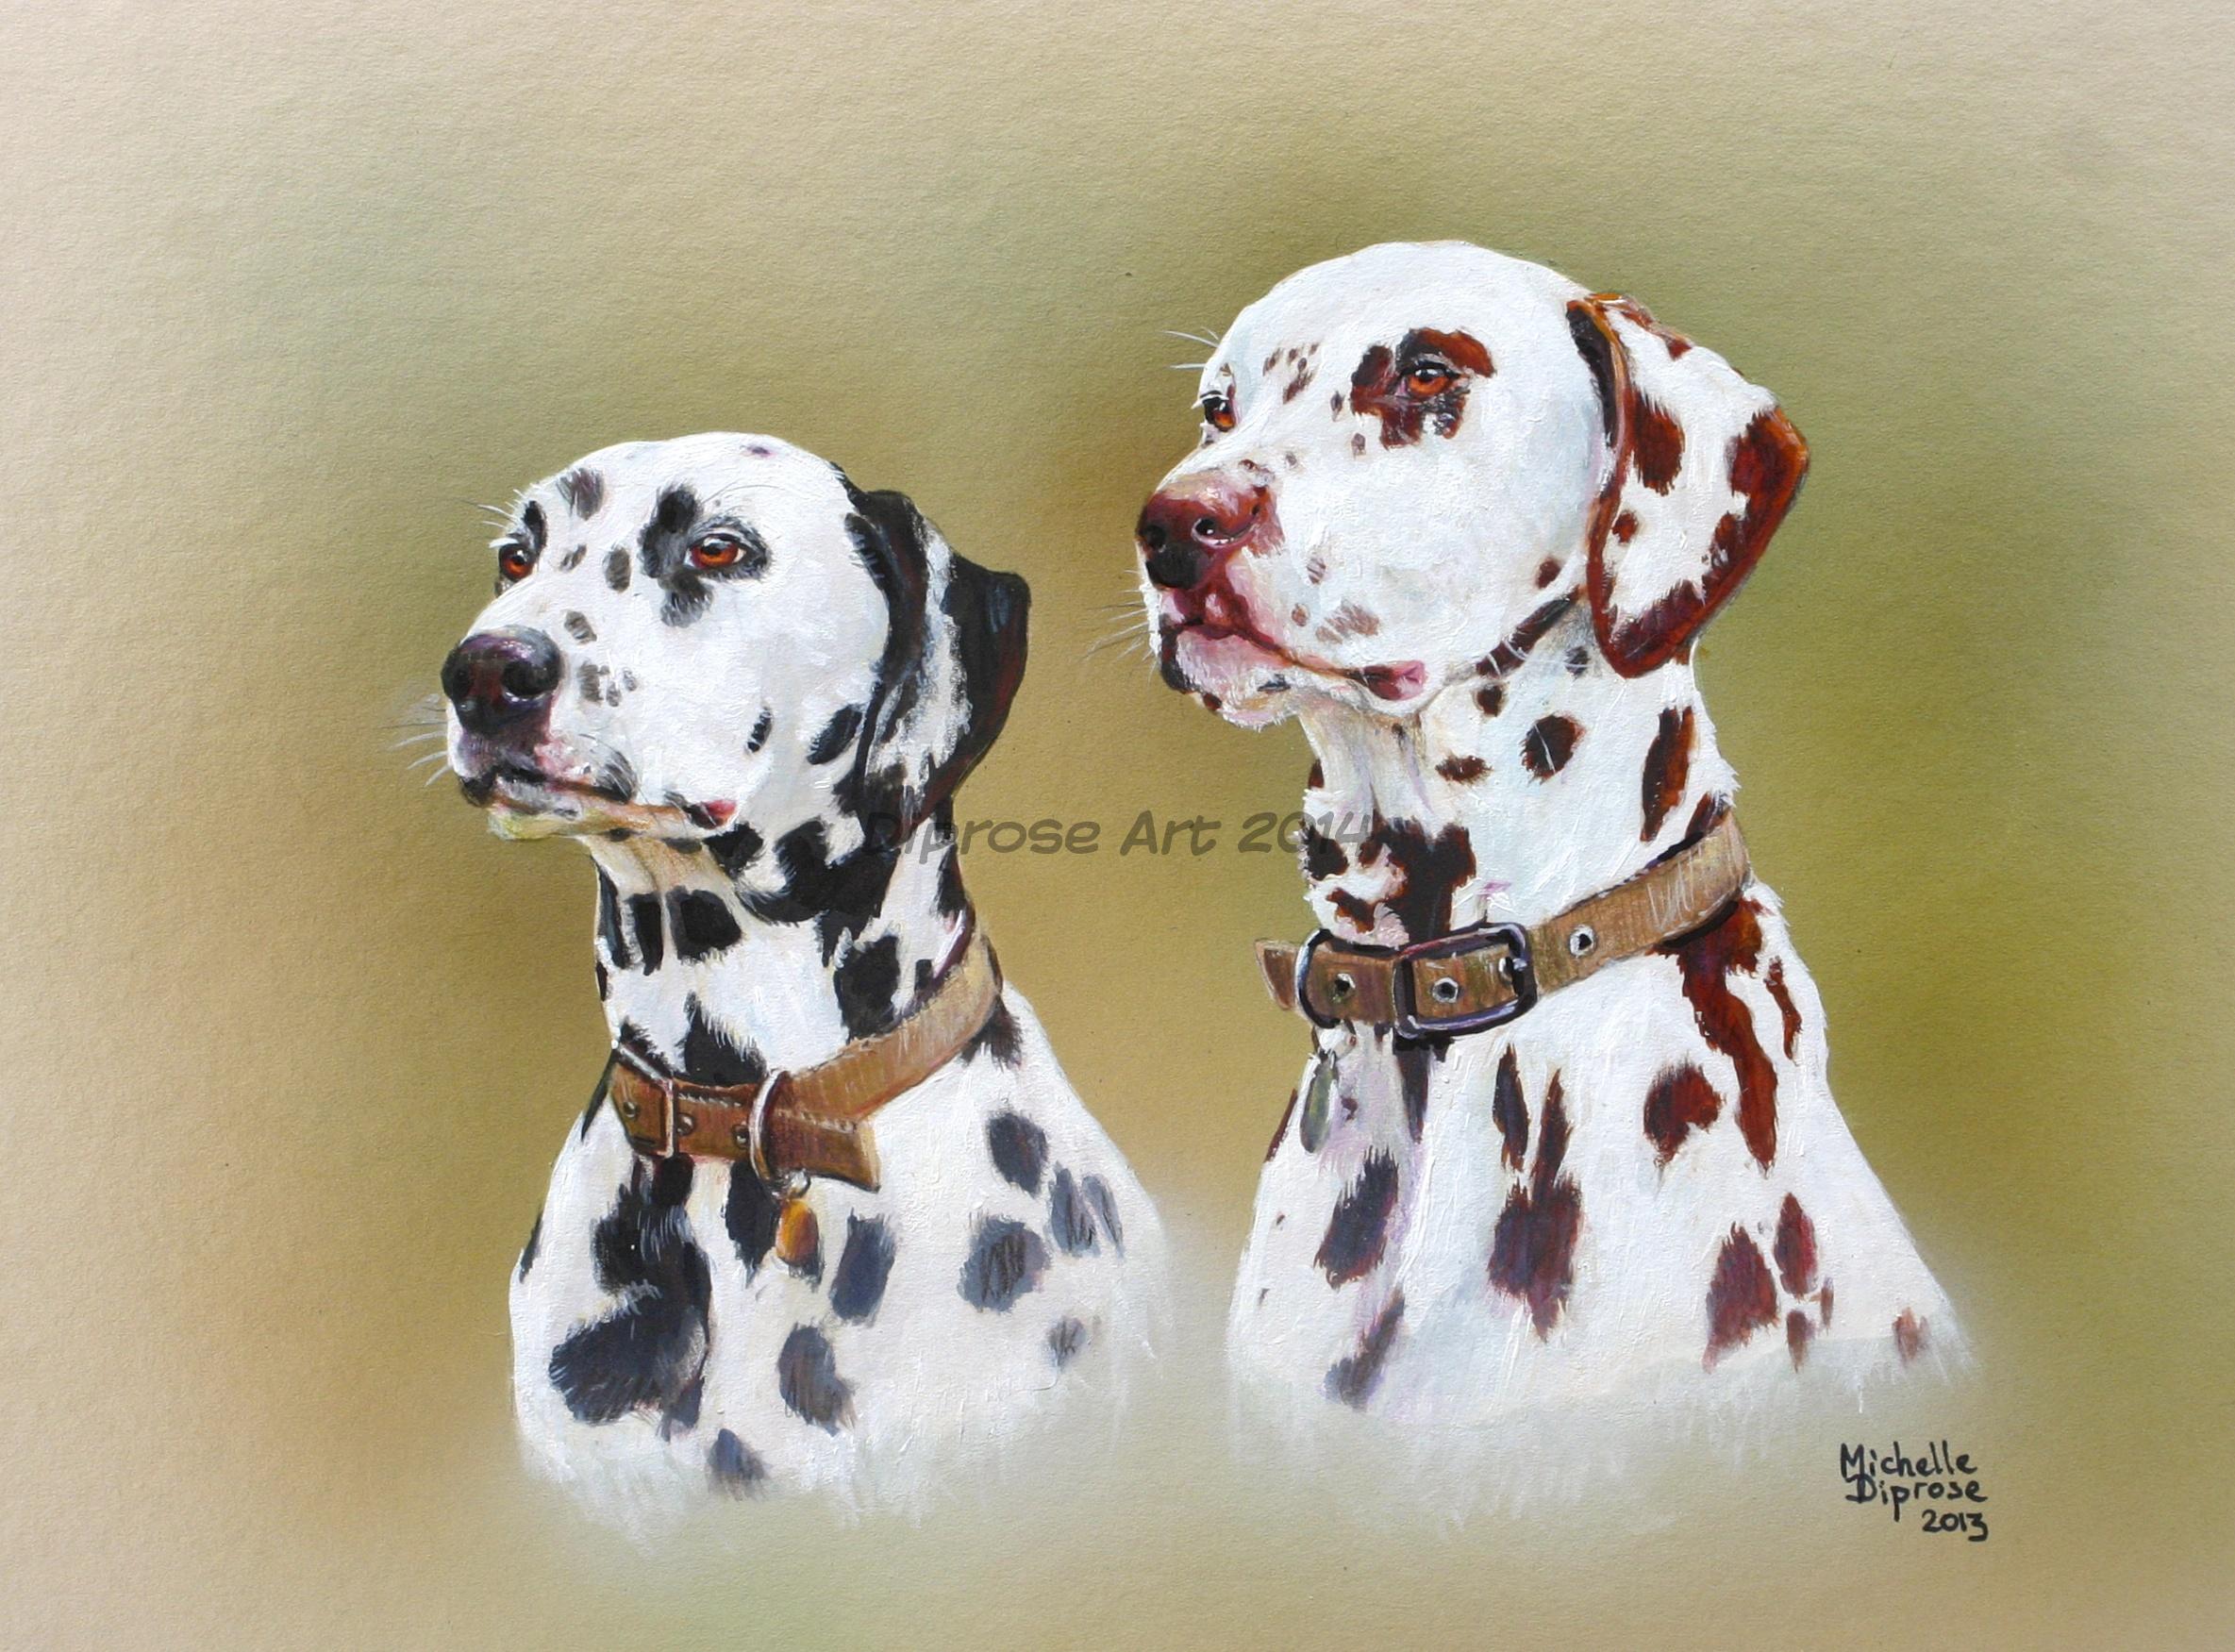 Acrylics on board - approx A4 - pet dog portrait - the male Dalmatian was liver and white whilst the smaller female the more usual black and white - by the end of this portrait I was certainly seeing spots before my eyes!